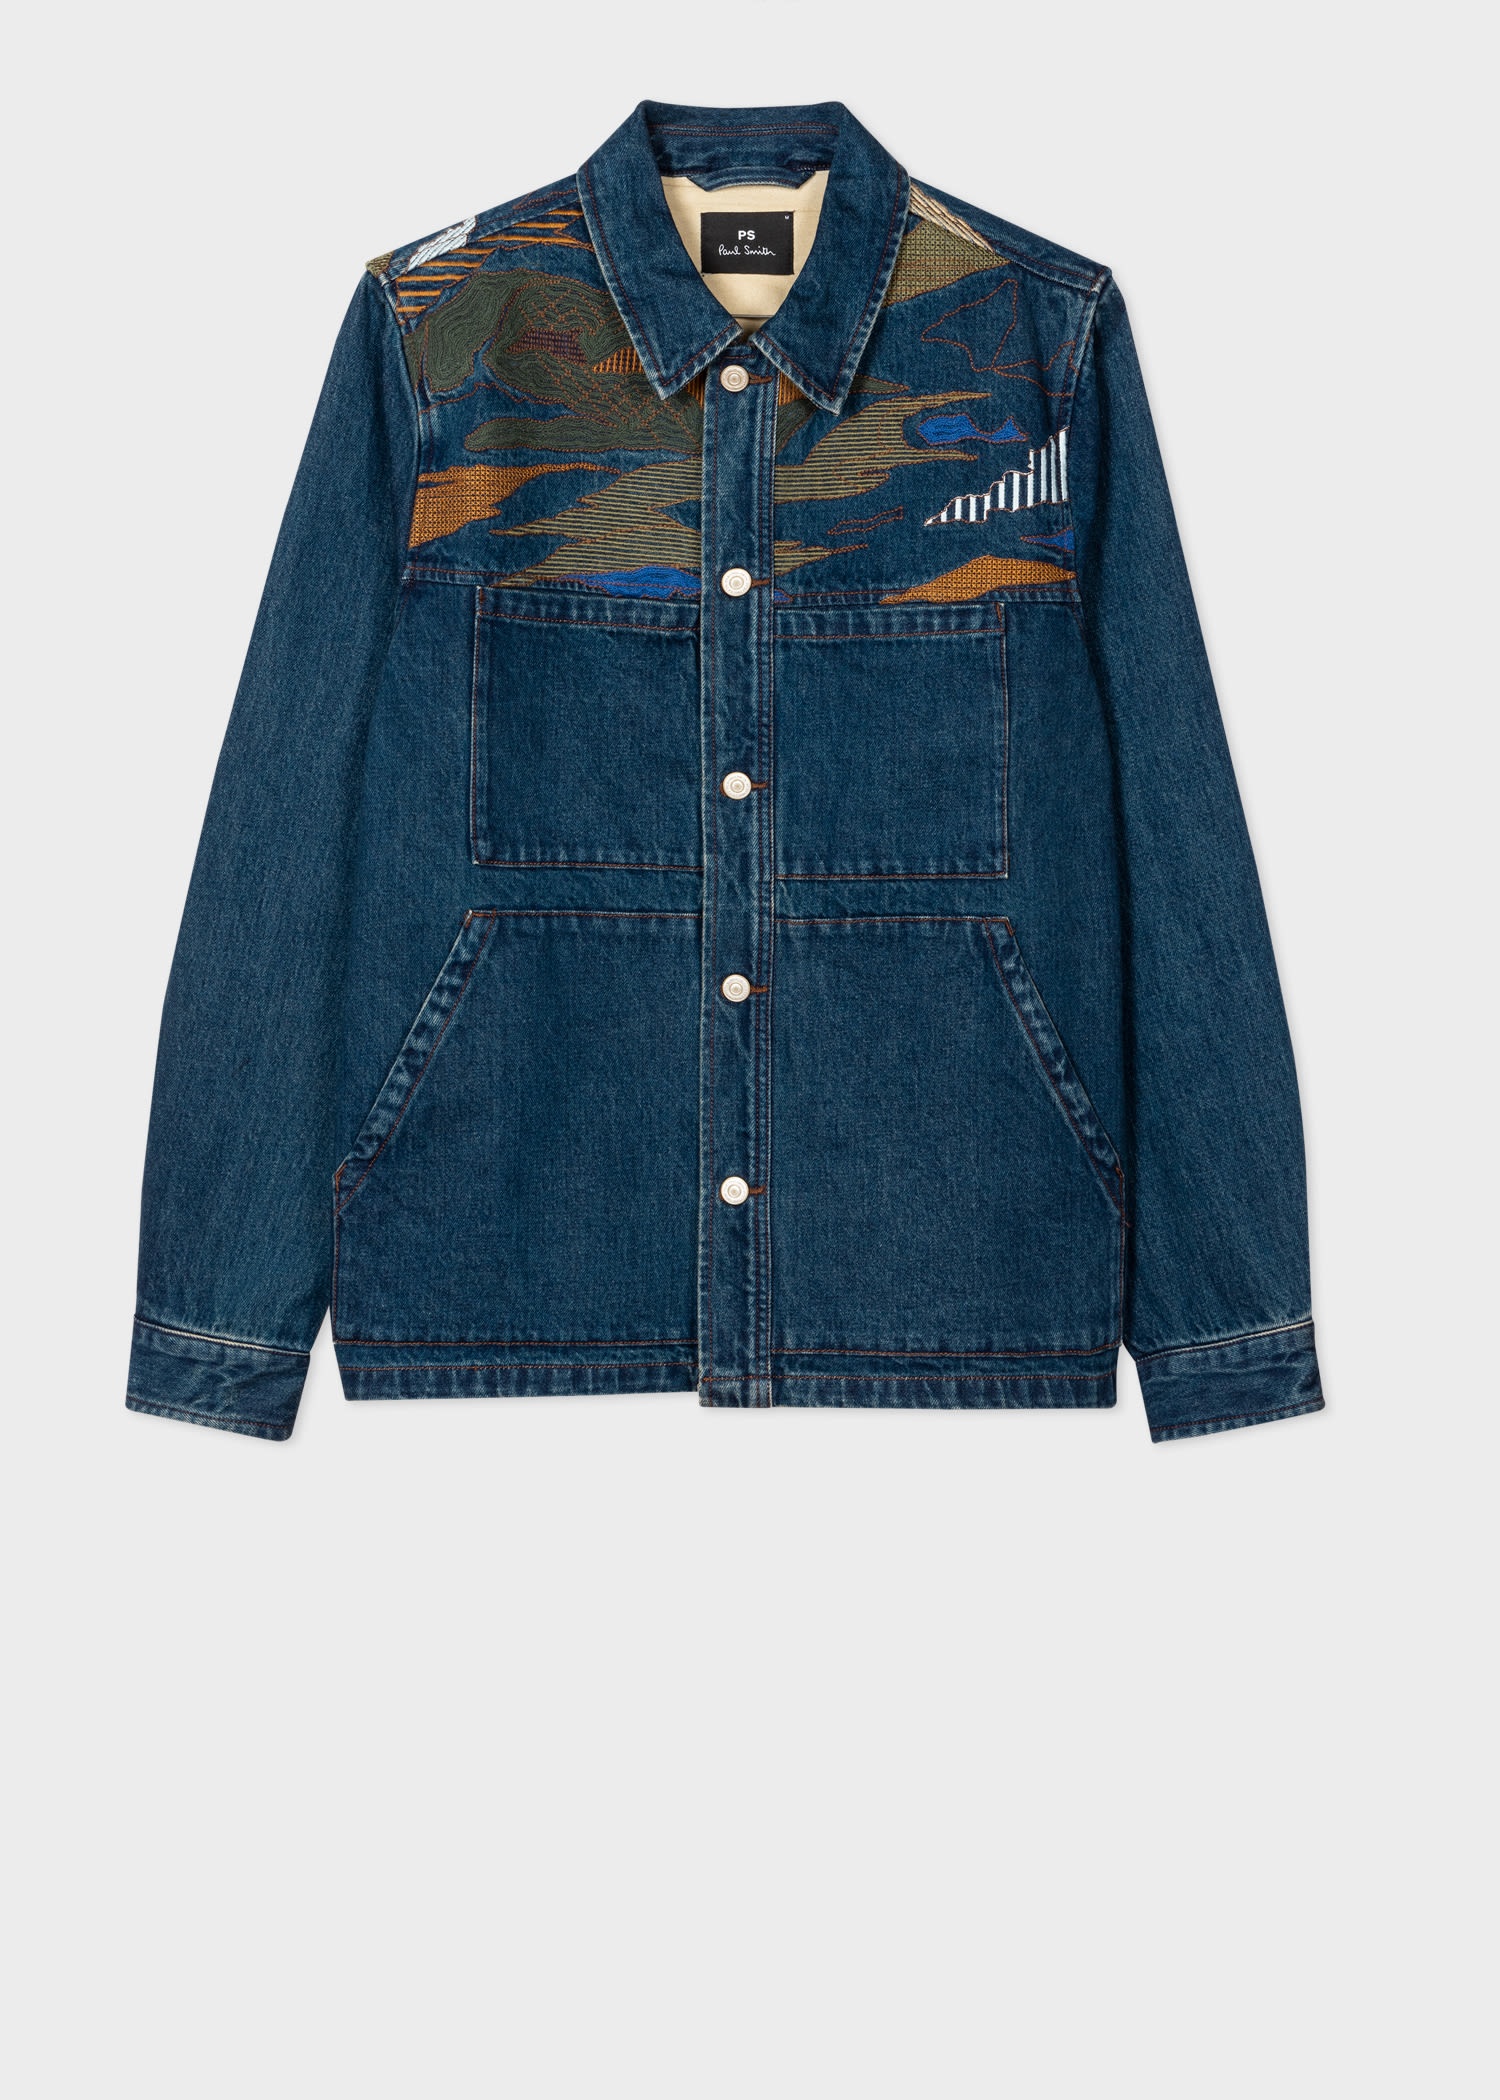 Paul Smith 'Plains' Embroidery Work Jacket | REVERSIBLE